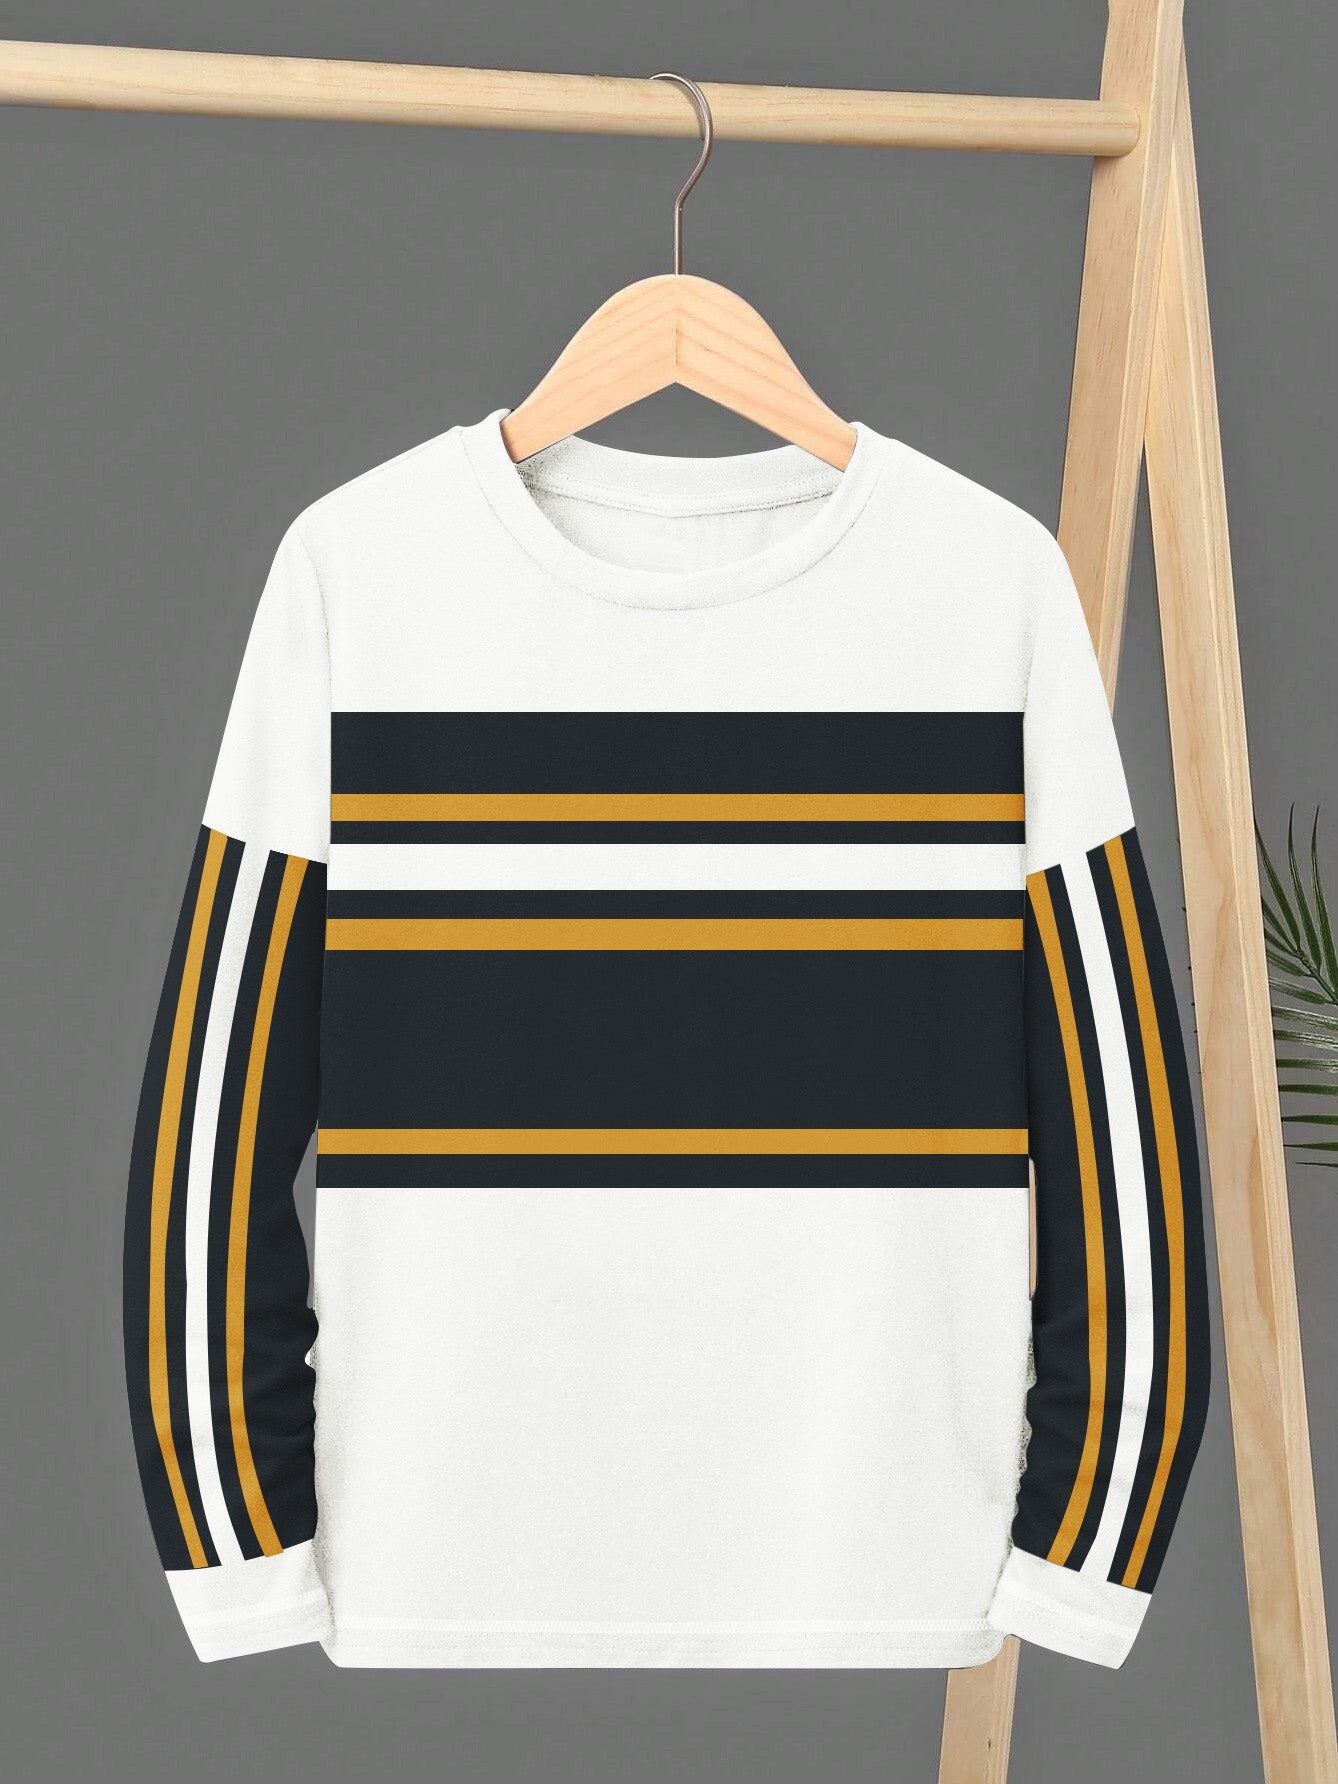 NXT Crew Neck Single Jersey Long Sleeve Tee Shirt For Kids-White & Navy Panel with Stripes-SP2278